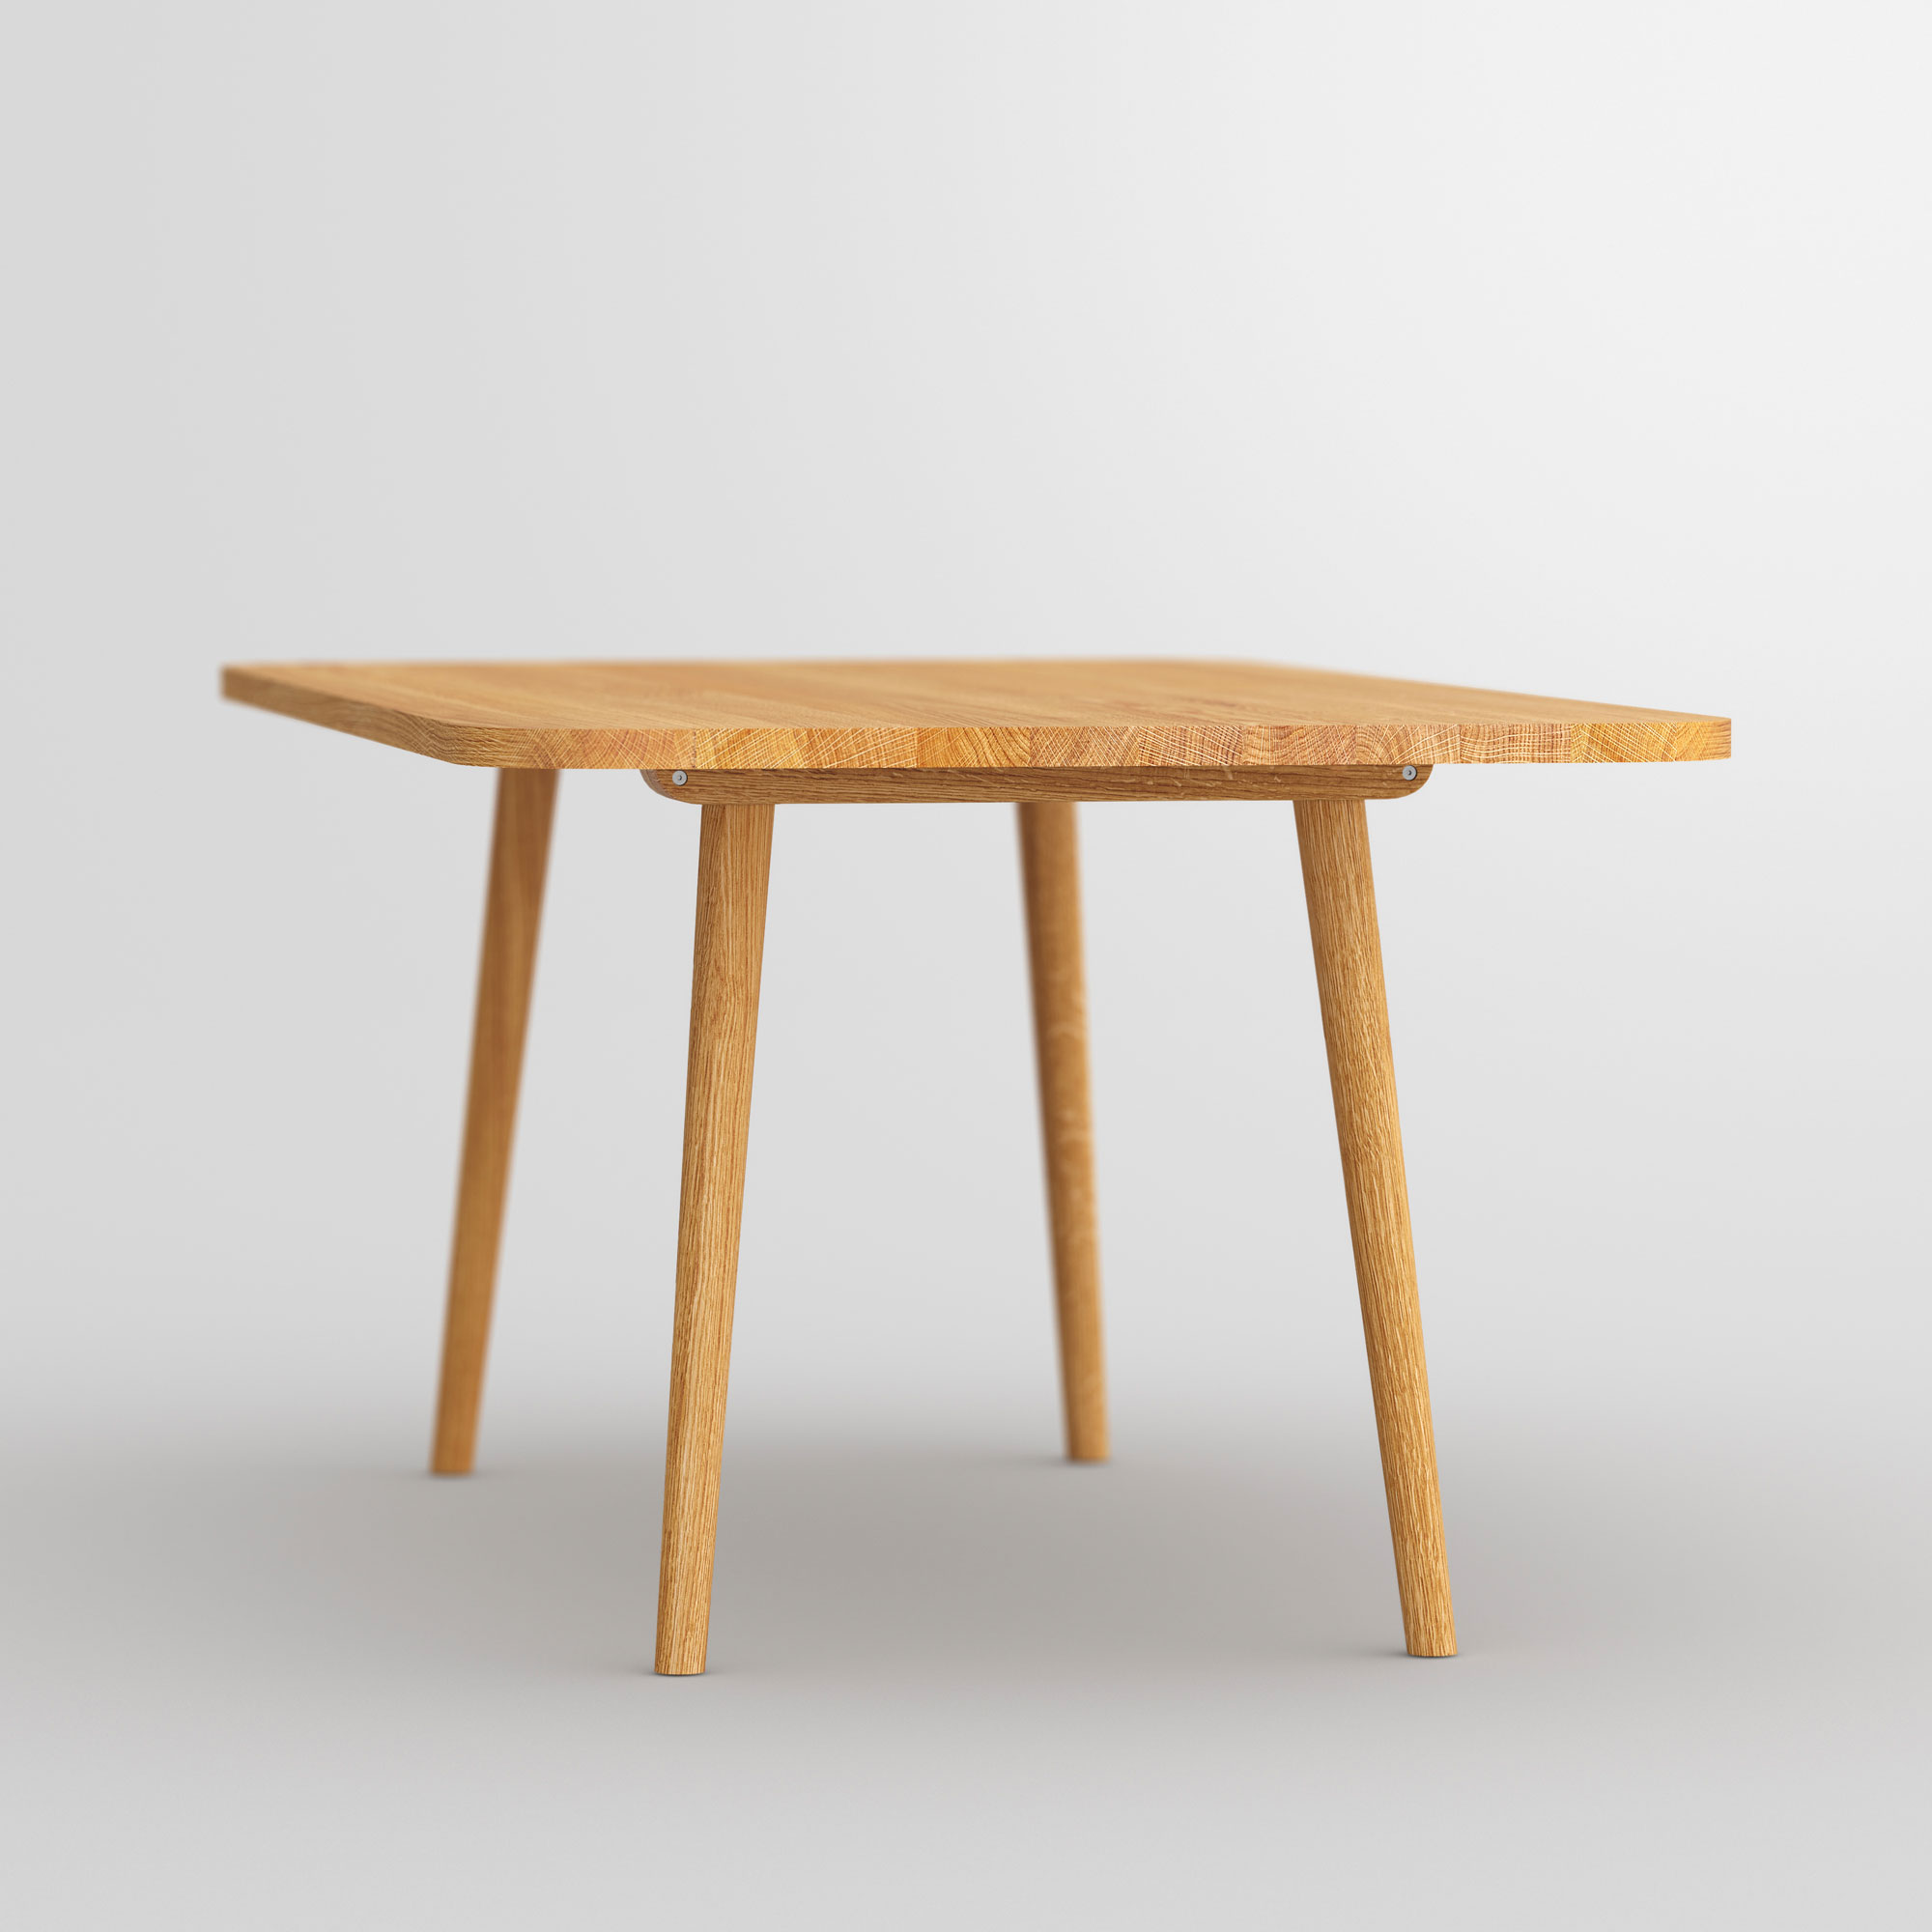 Wood Dining Table UNA cam3-ZDP custom made in solid wood by vitamin design